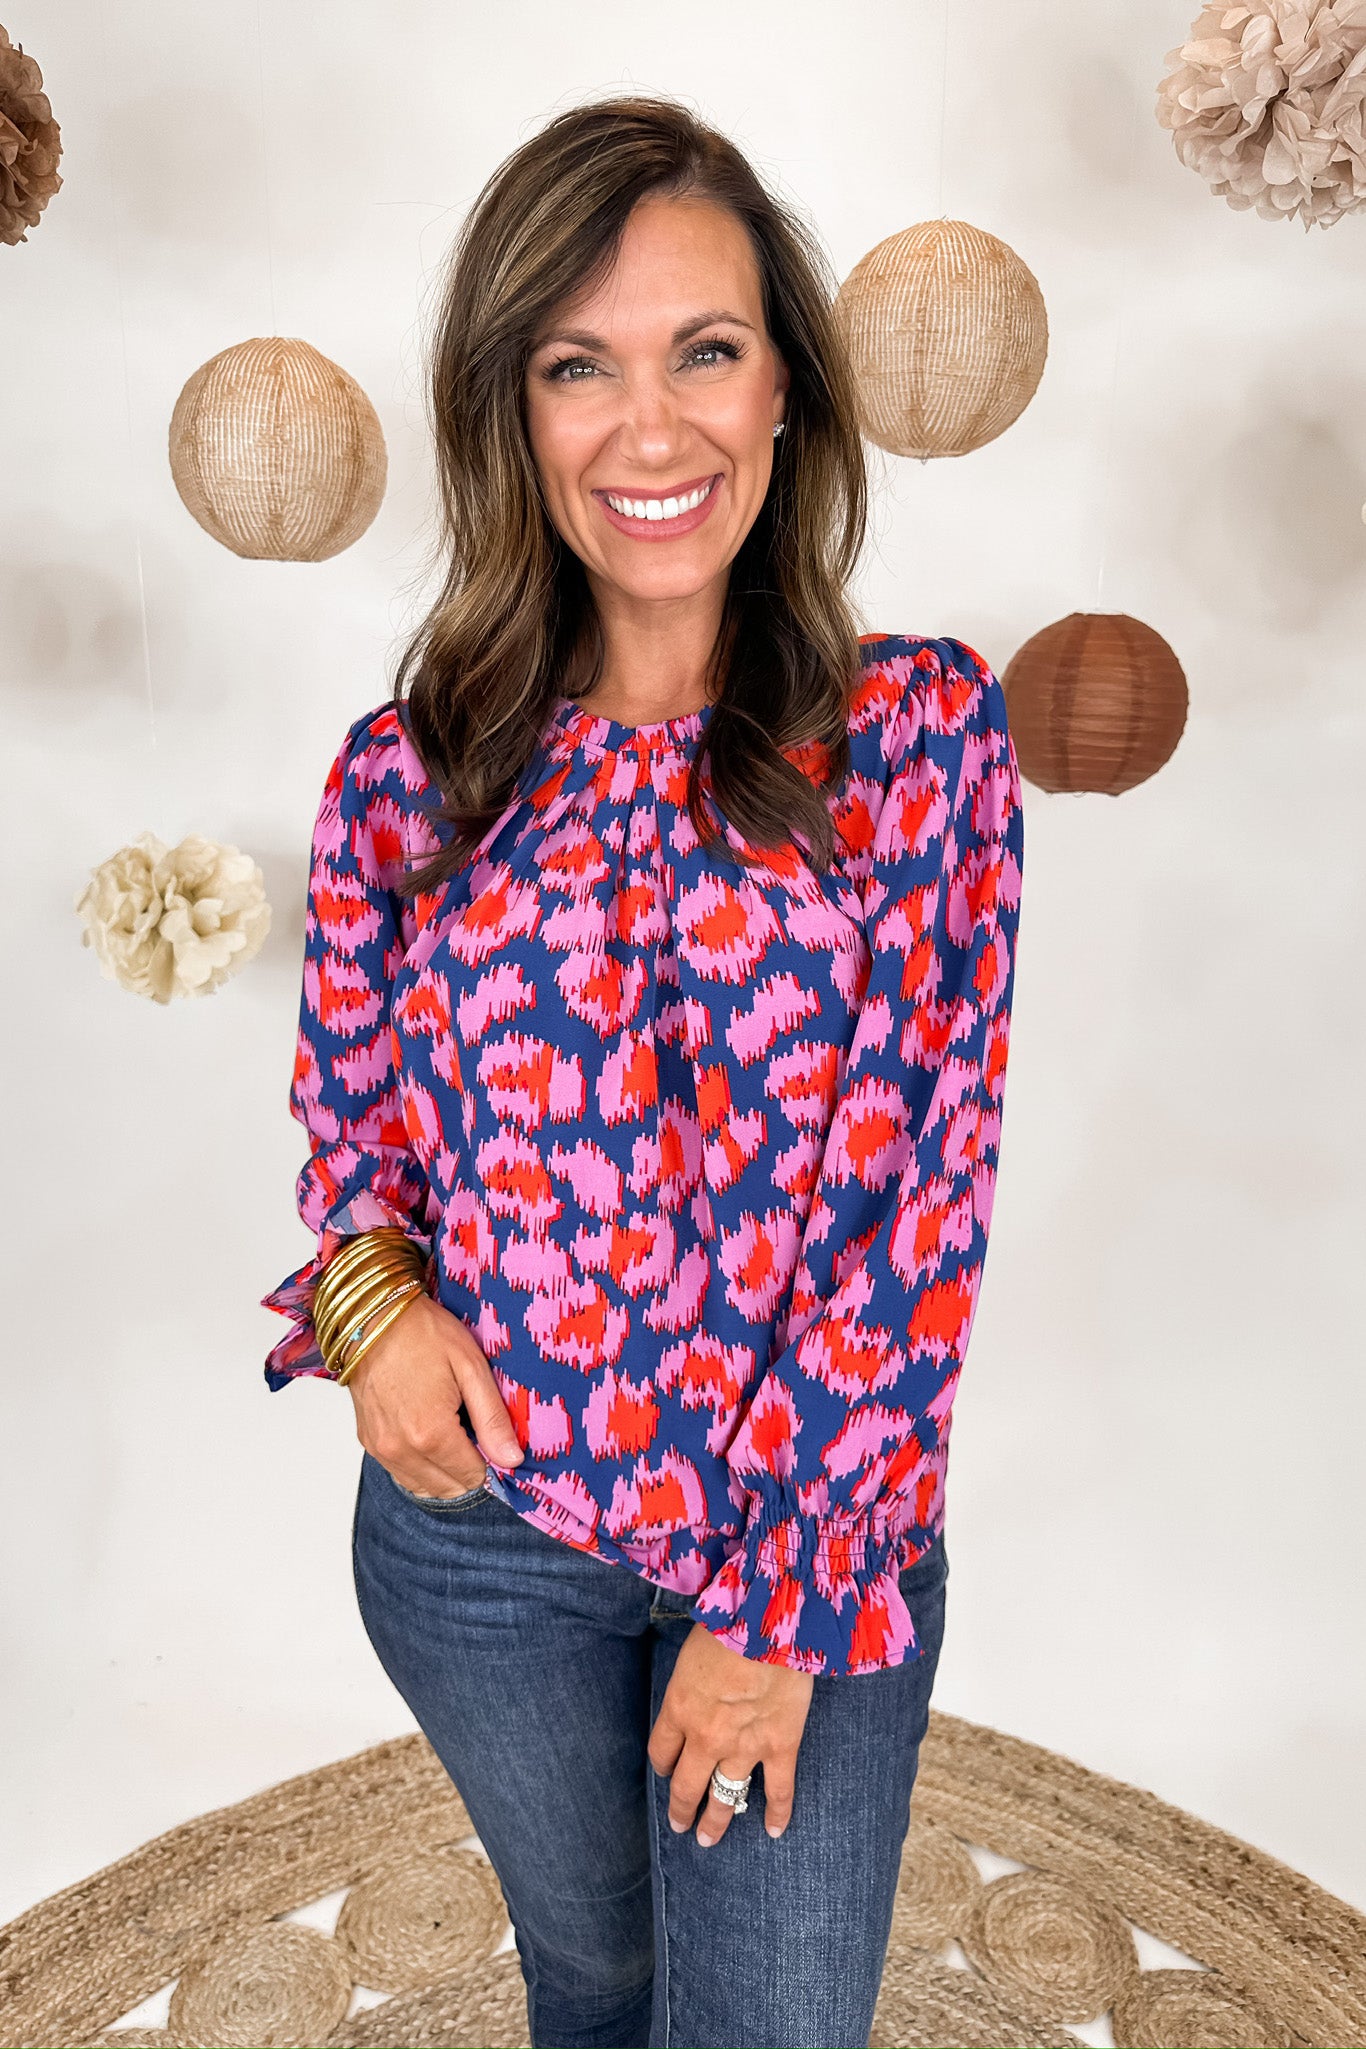 The Quinn Fancy Like Top by Michelle McDowell